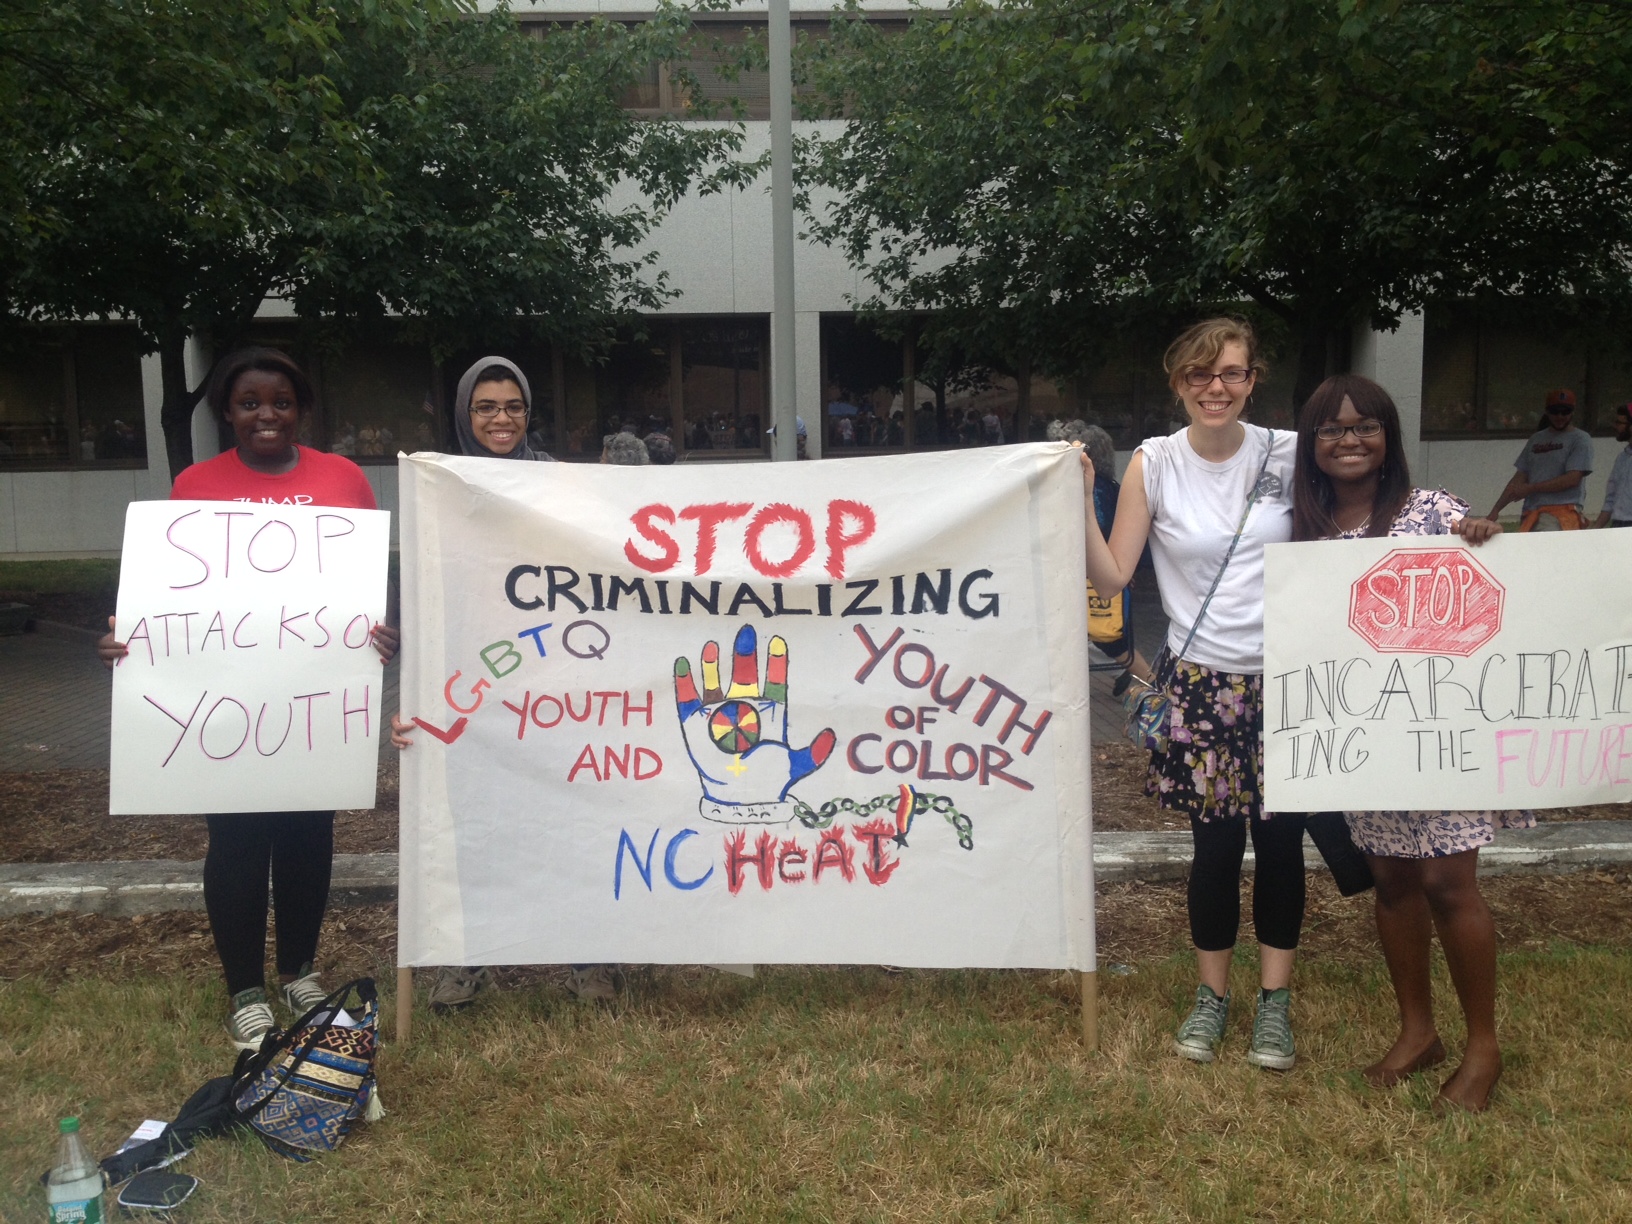 NC HEAT & the Youth Organizing Institute bring their message to Moral Mondays for the 4th week!